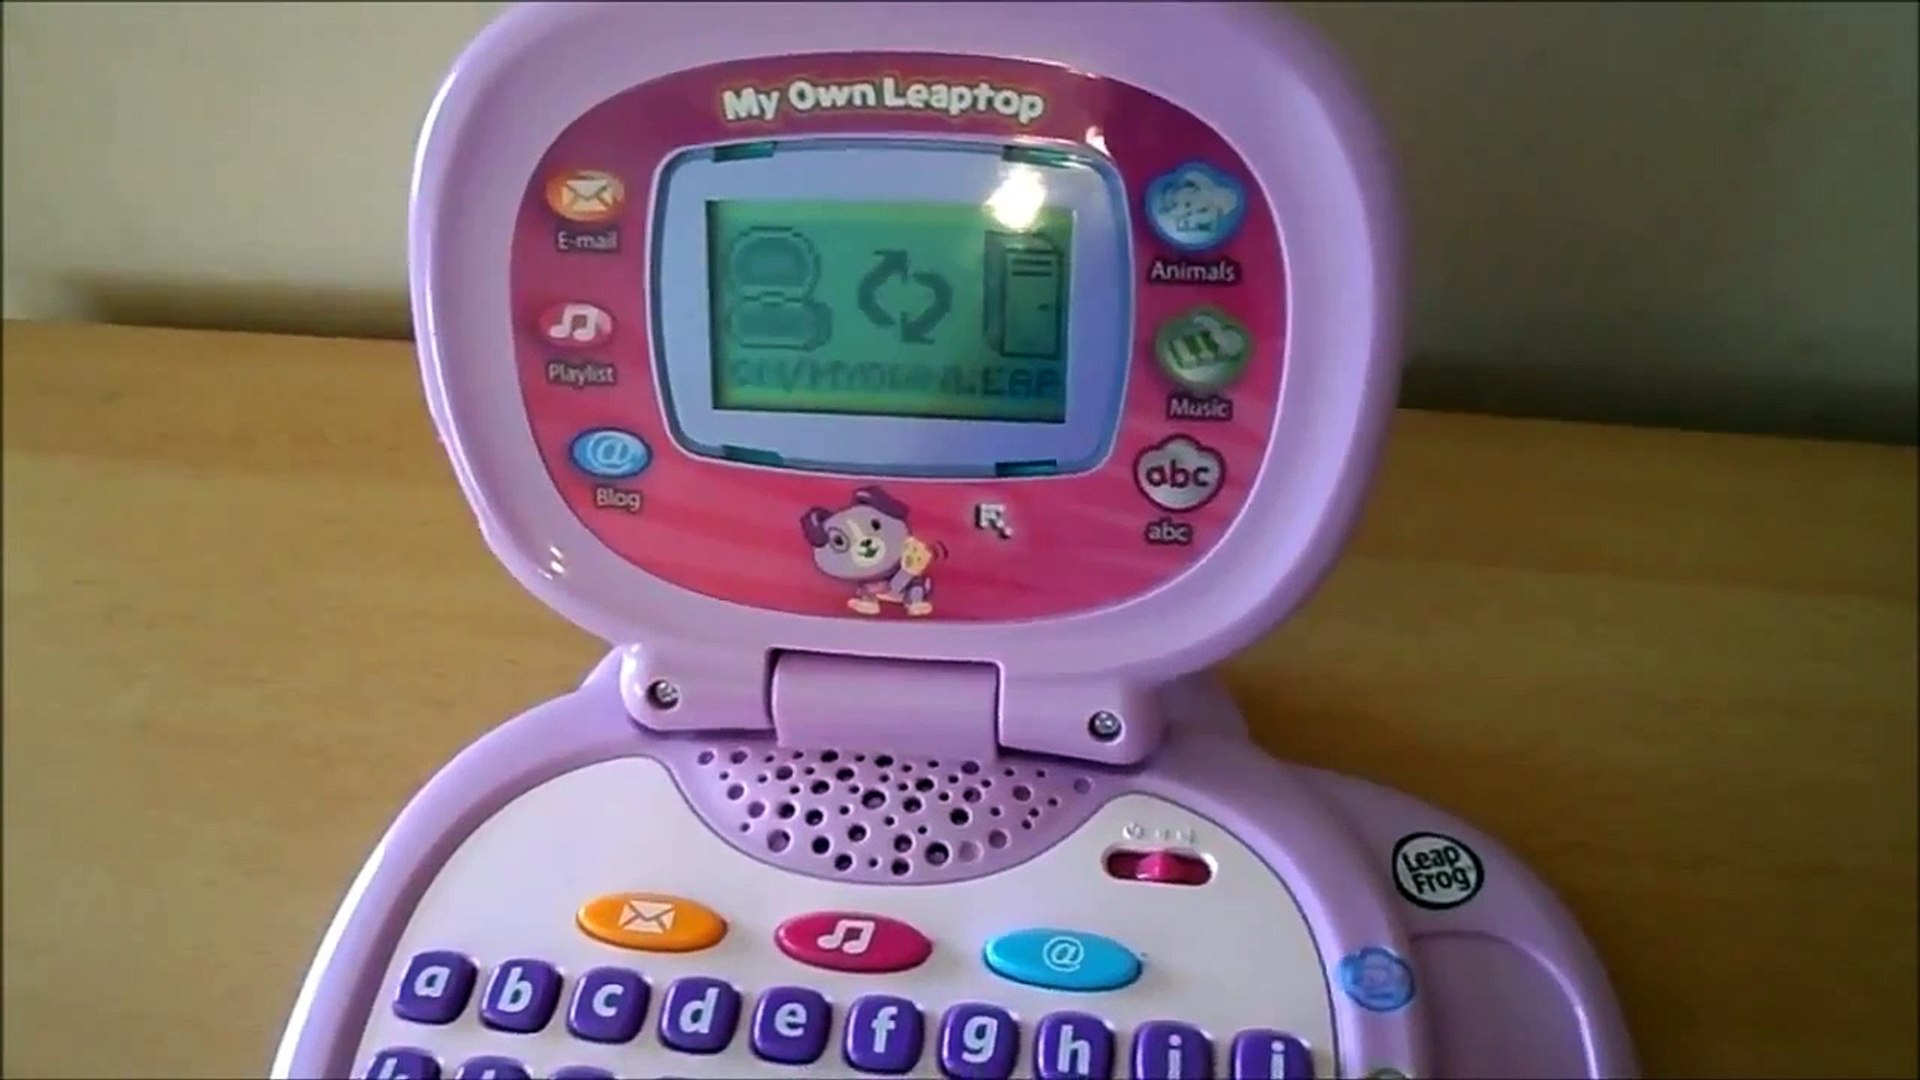 Kindergarten Leapfrog Toy Pc Laptop To Learn Phonics Learn English